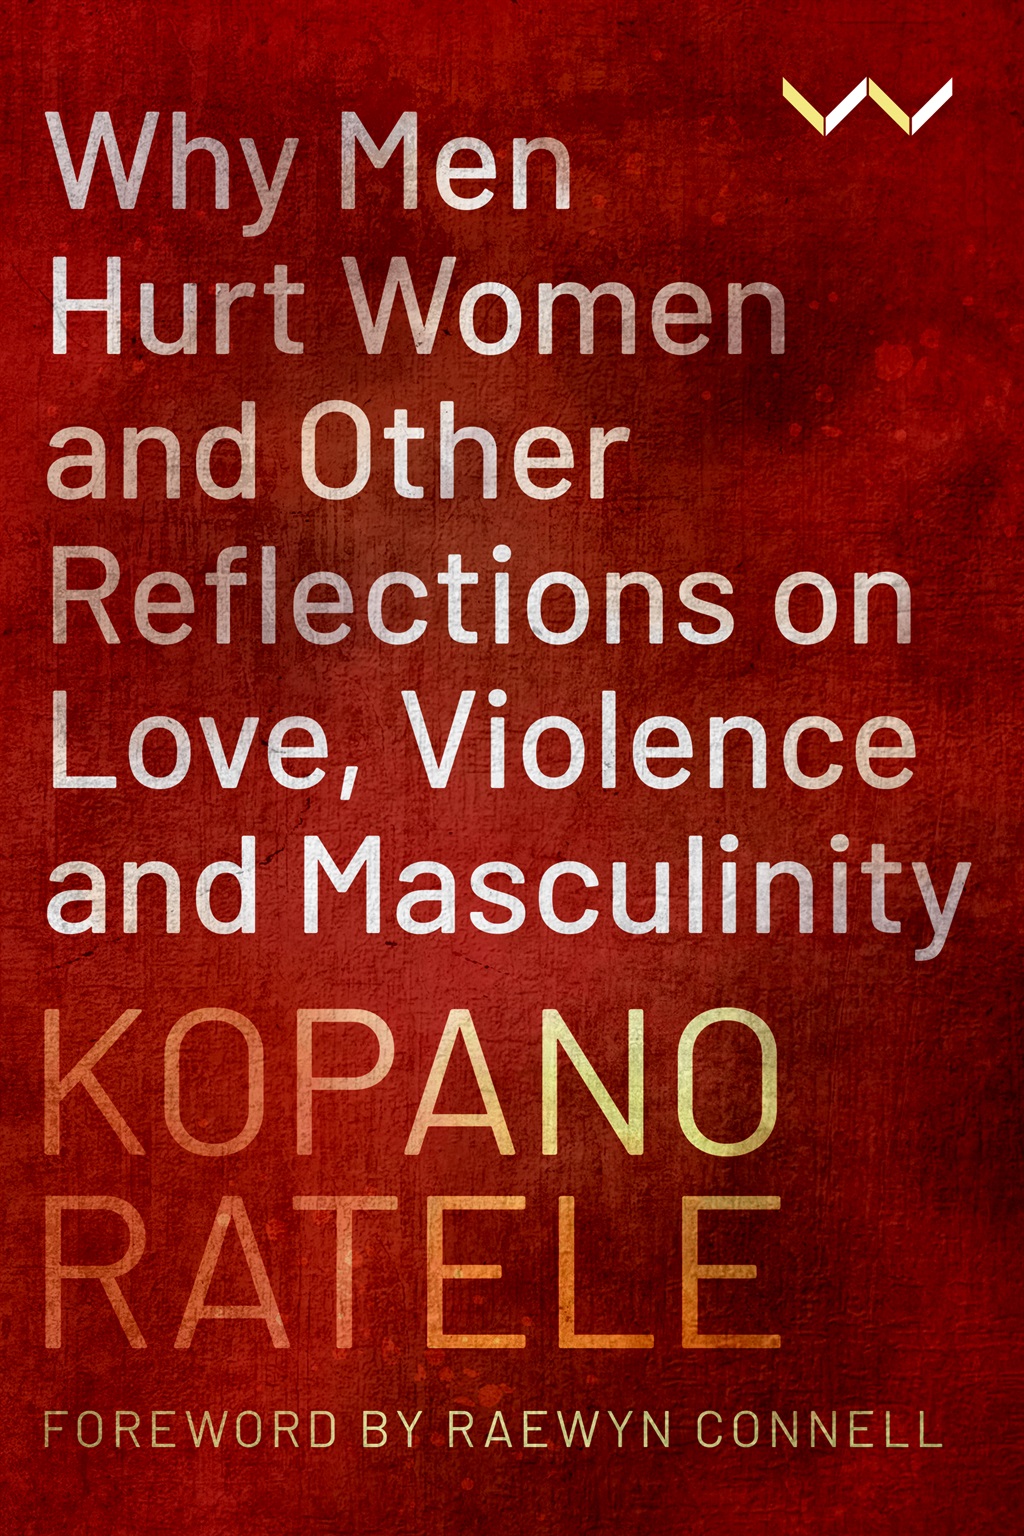 Why Men Hurt Women and Other Reflections on Love, Violence and Masculinity by Kopano Ratele. (Wits University Press)